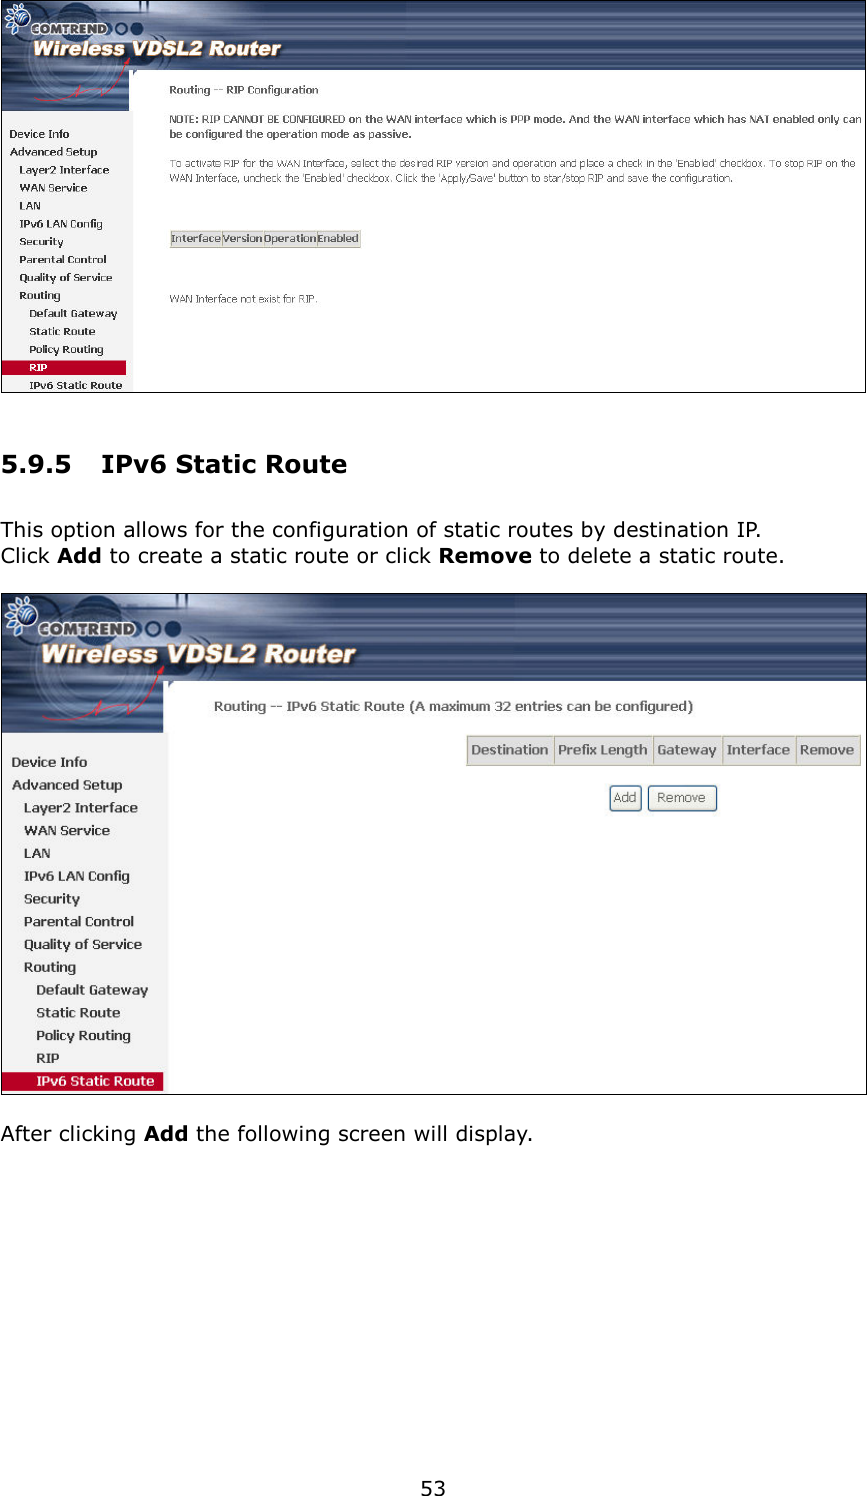   53  5.9.5  IPv6 Static Route This option allows for the configuration of static routes by destination IP.   Click Add to create a static route or click Remove to delete a static route.    After clicking Add the following screen will display.    